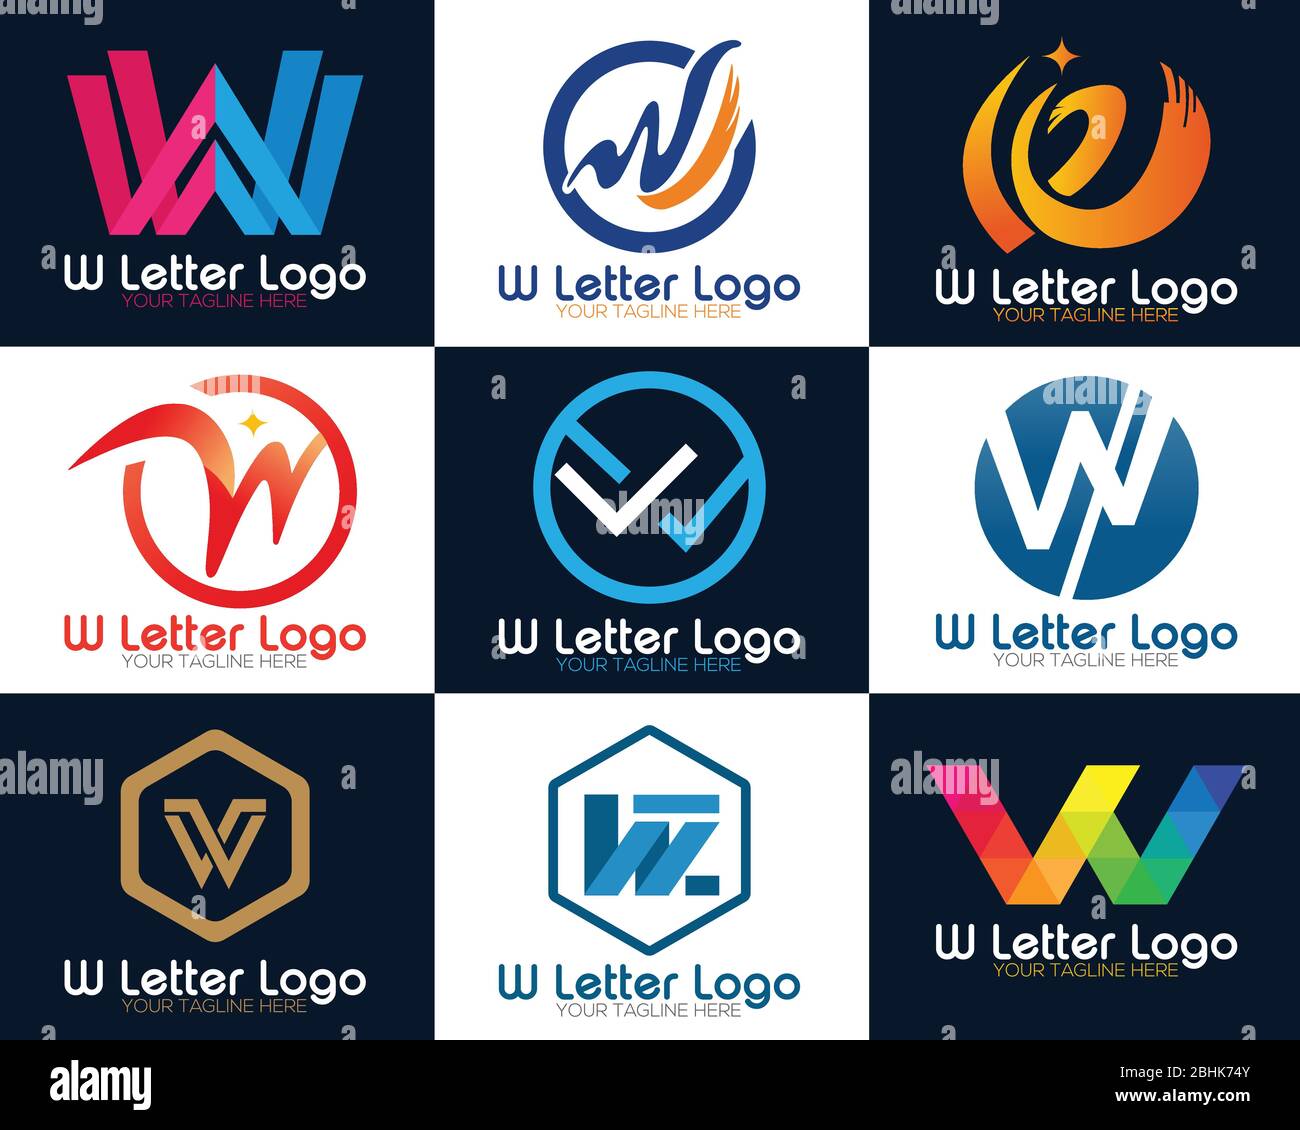 Stylish W letter financial insurance logo sign. Letter W logo icon design template elements. letter w logo vector. Stock Vector